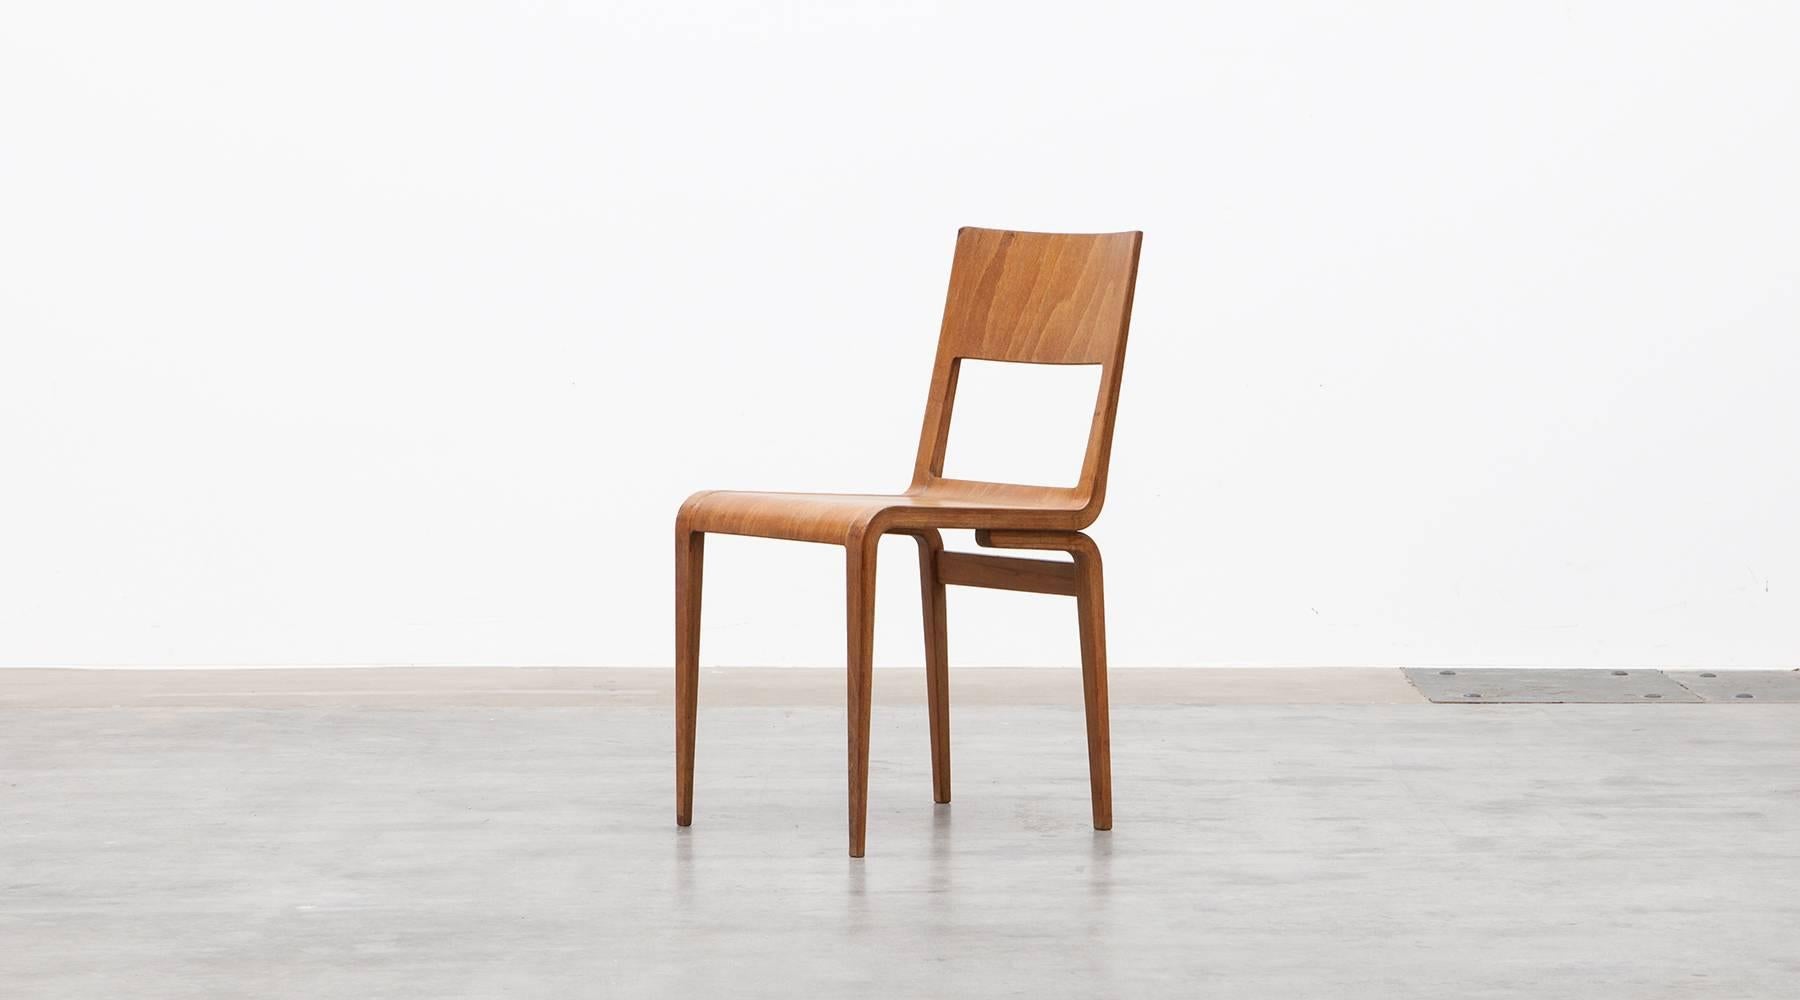 Chair in beech plywood by Erich Menzel, Germany, 1951.

A plywood chair by Erich Menzel designed in 1950. The plywood is made of more than 20 veneer films pressed together. The design of the chair strongly reminds of the design of the Finnish Alvar